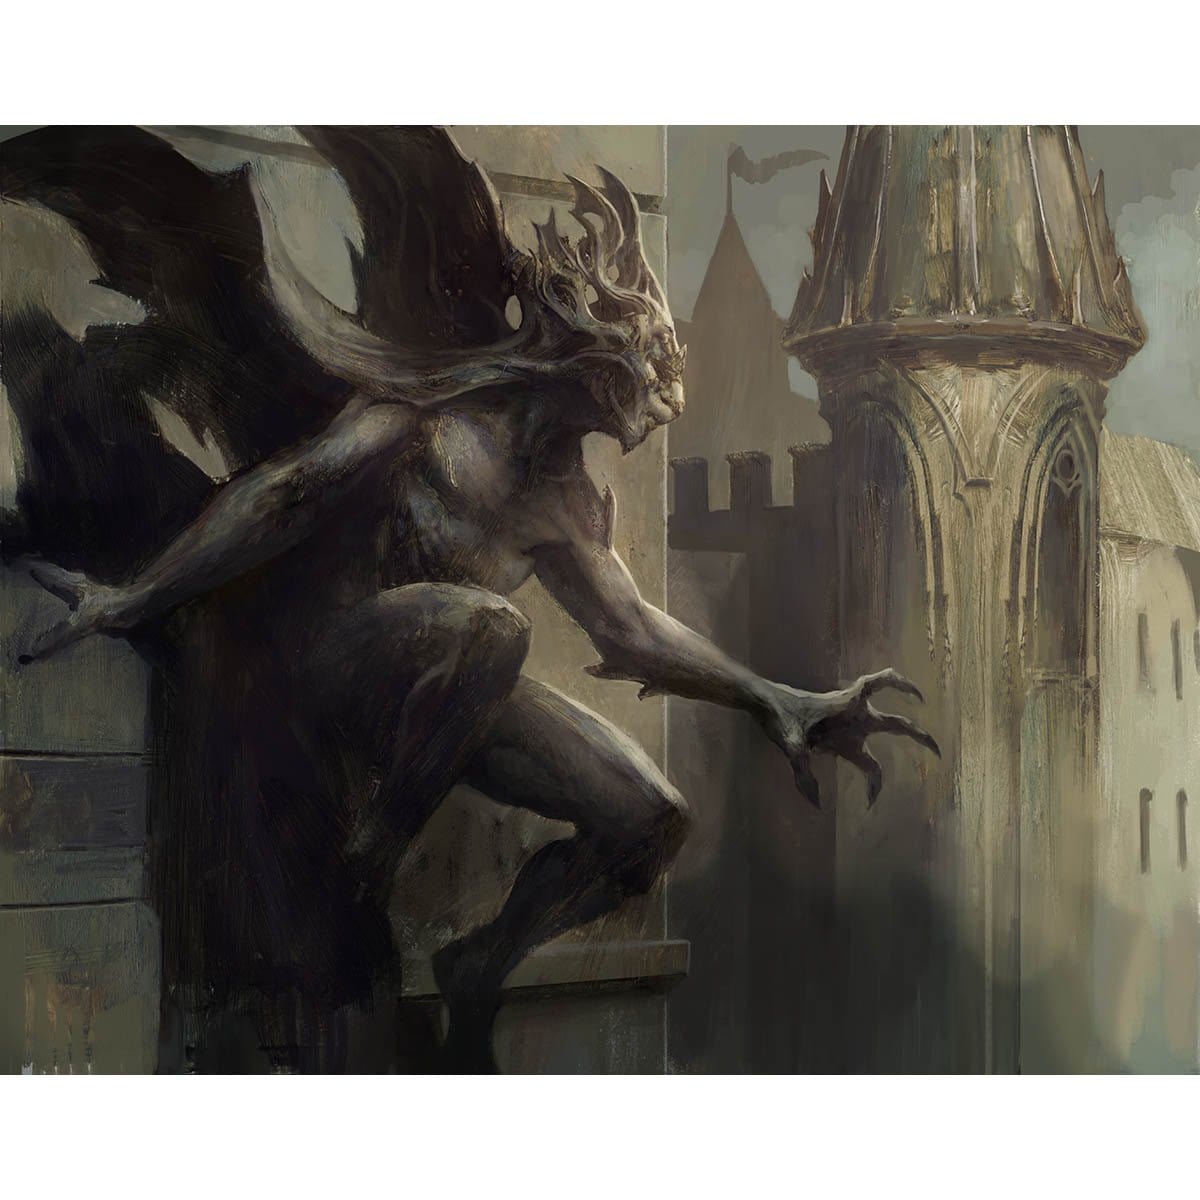 Locthwain Gargoyle Print - Print - Original Magic Art - Accessories for Magic the Gathering and other card games